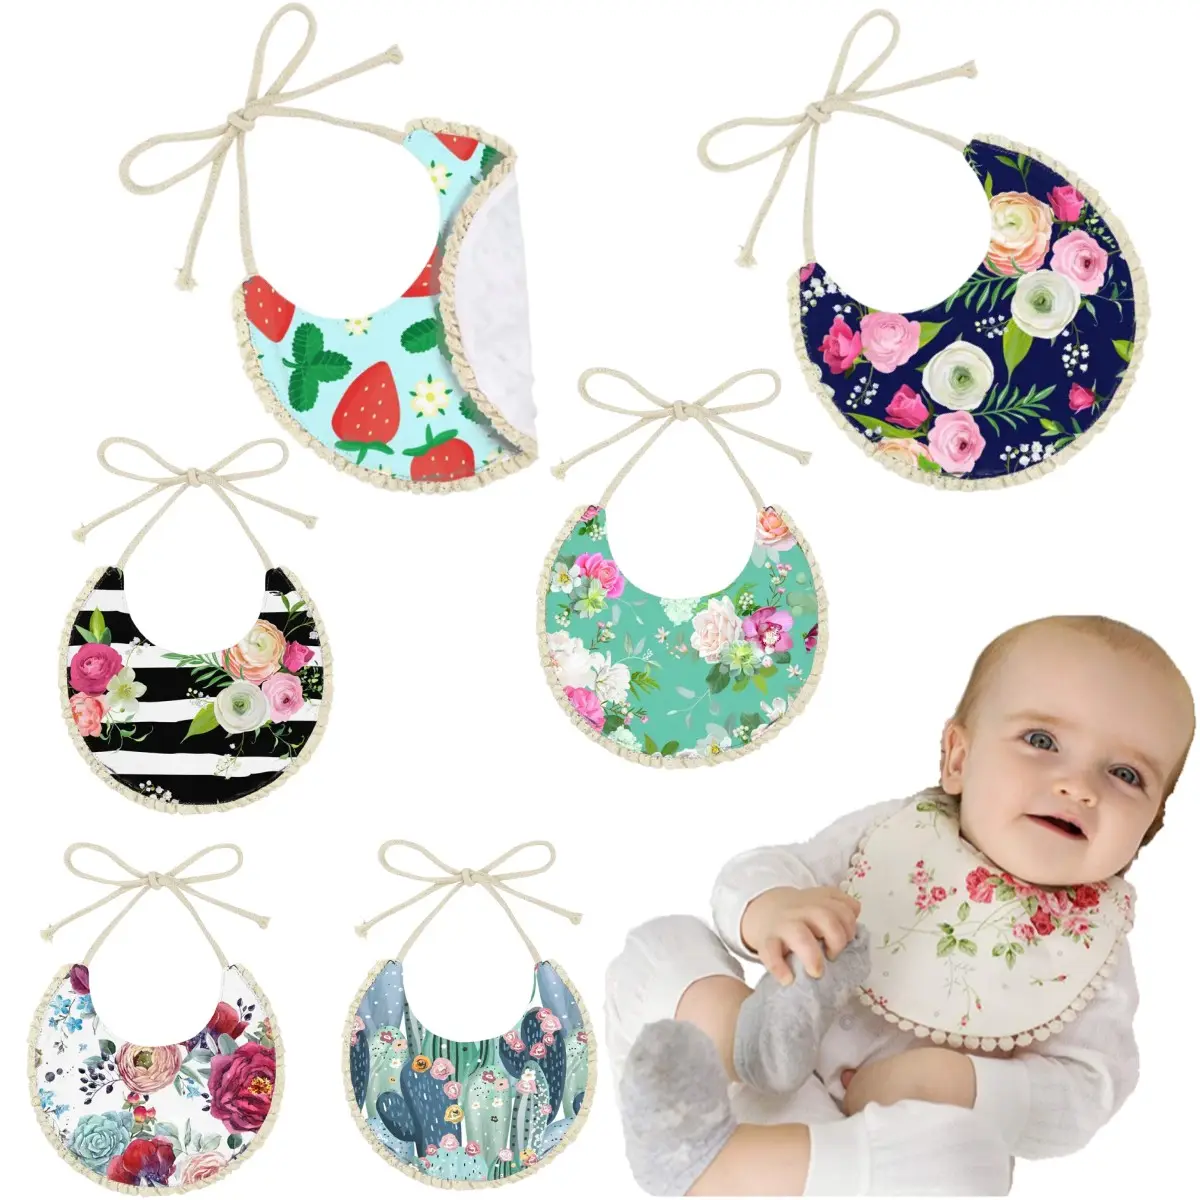 customizable waterproof soft adjustable toddler baby bib bibs baby products washable floral drool bibs baby